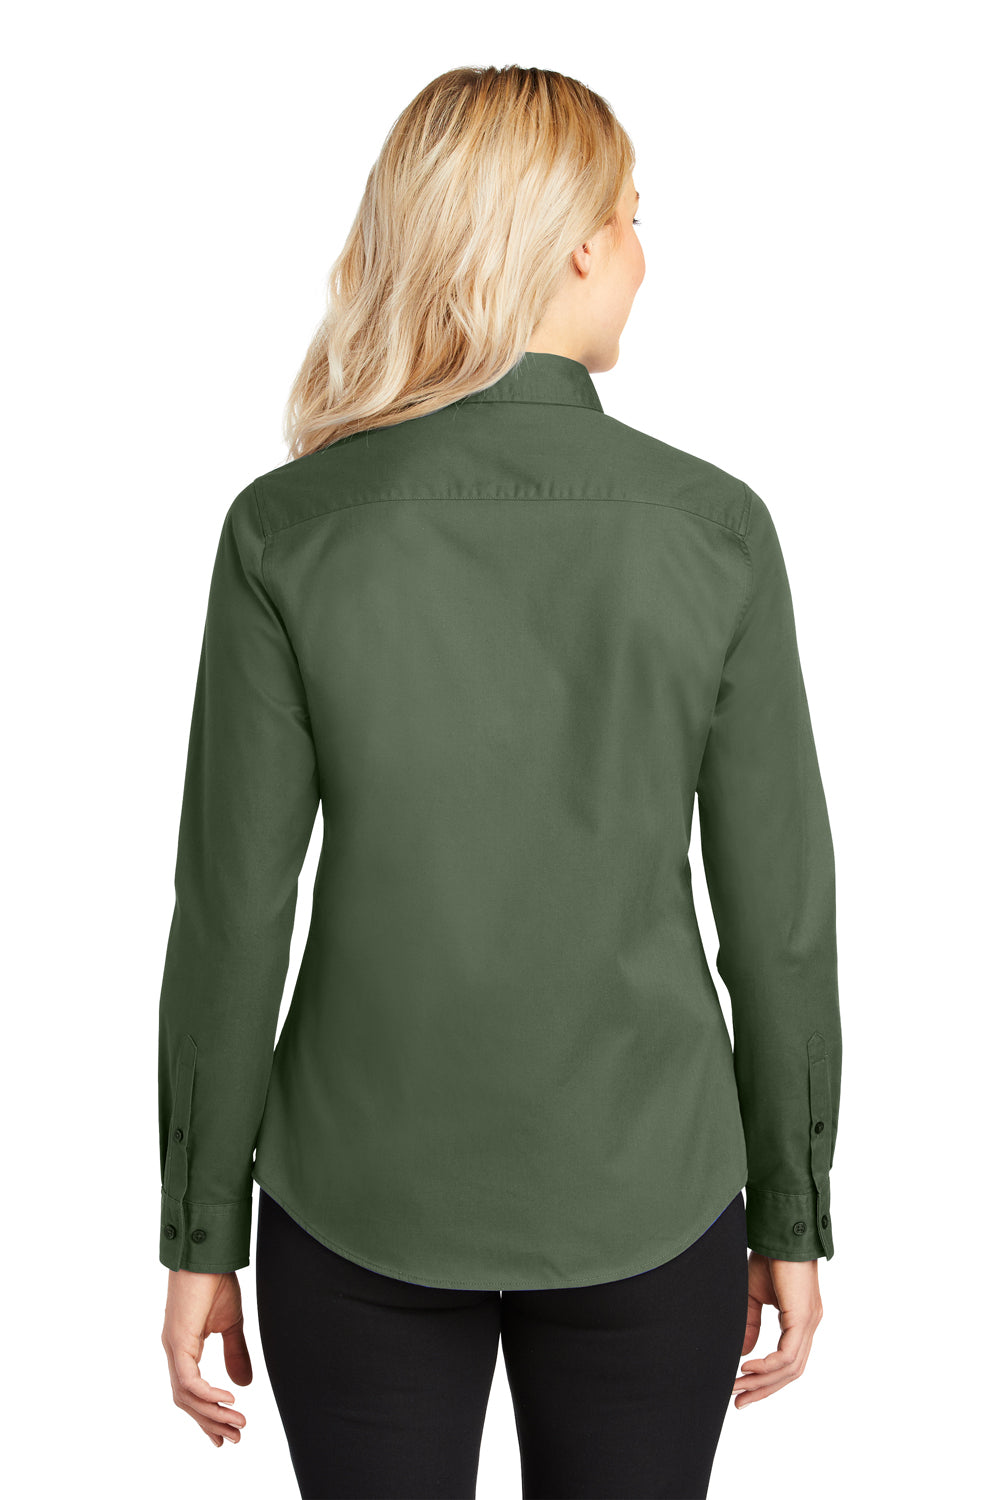 Port Authority L608 Womens Easy Care Wrinkle Resistant Long Sleeve Button Down Shirt Clover Green Back